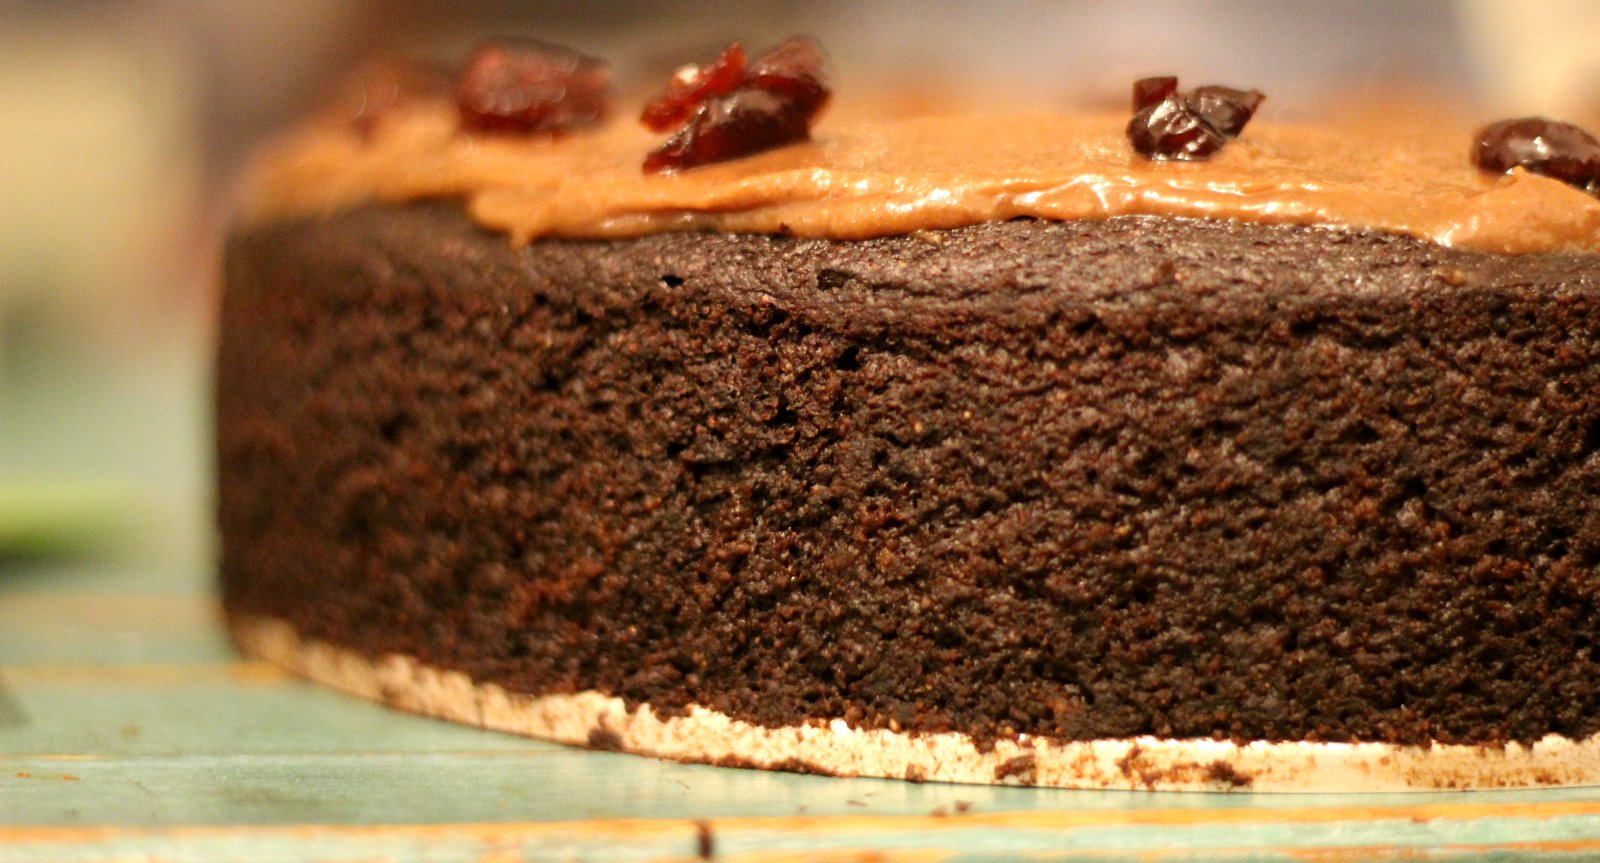 an up close s of a chocolate cake with peanut er and jelly